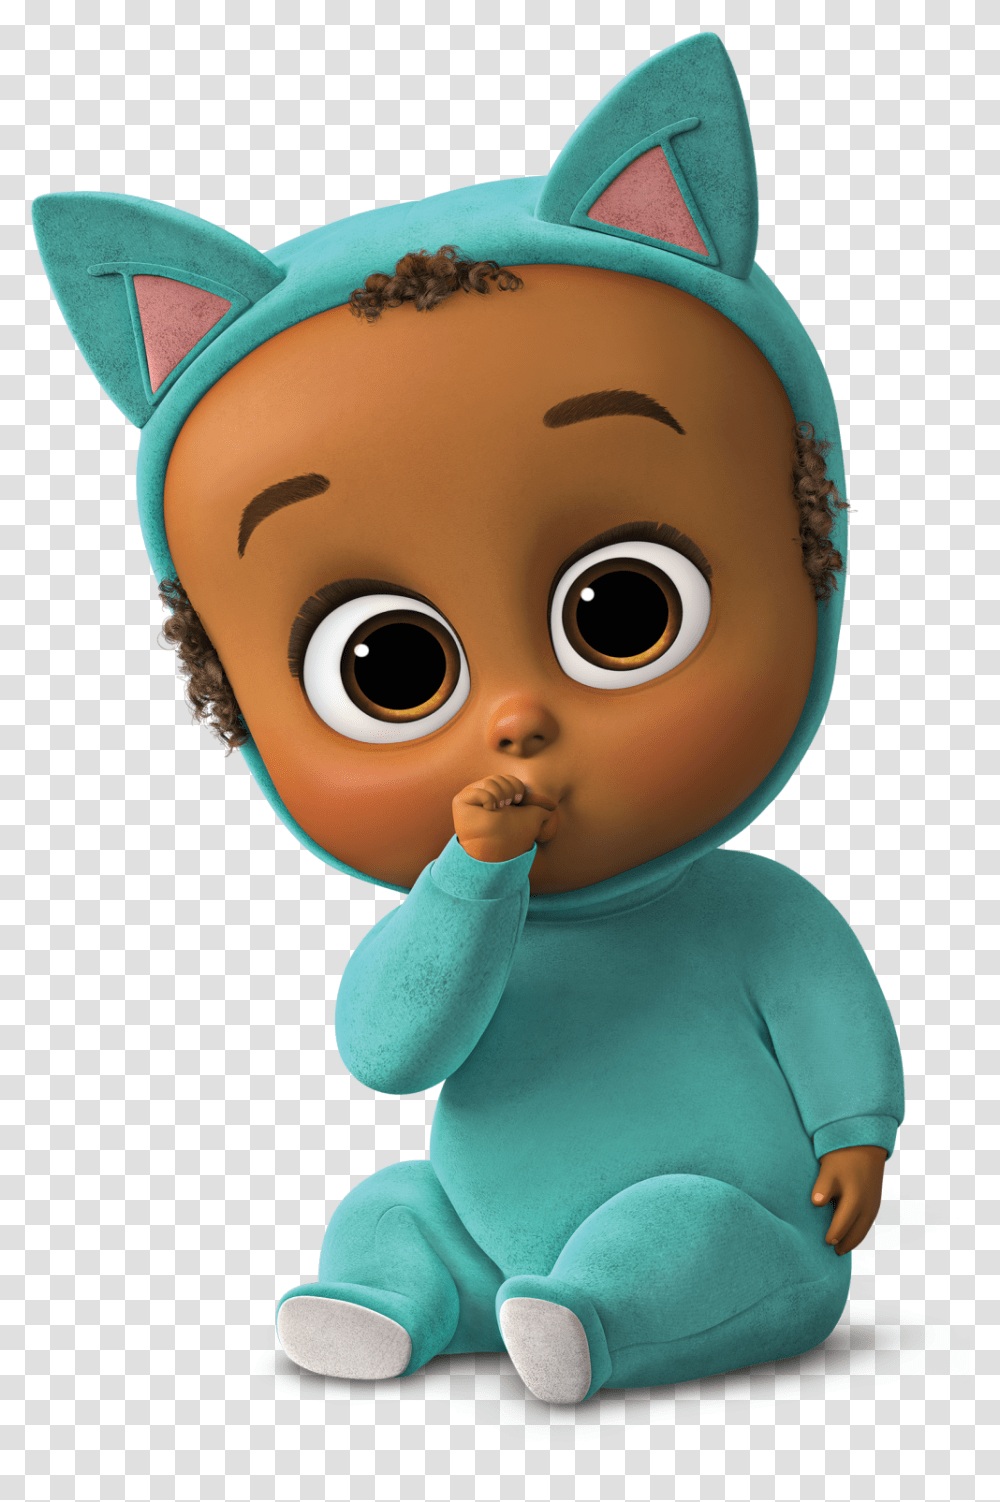 Boss Baby Characters, Doll, Toy, Head, Figurine Transparent Png